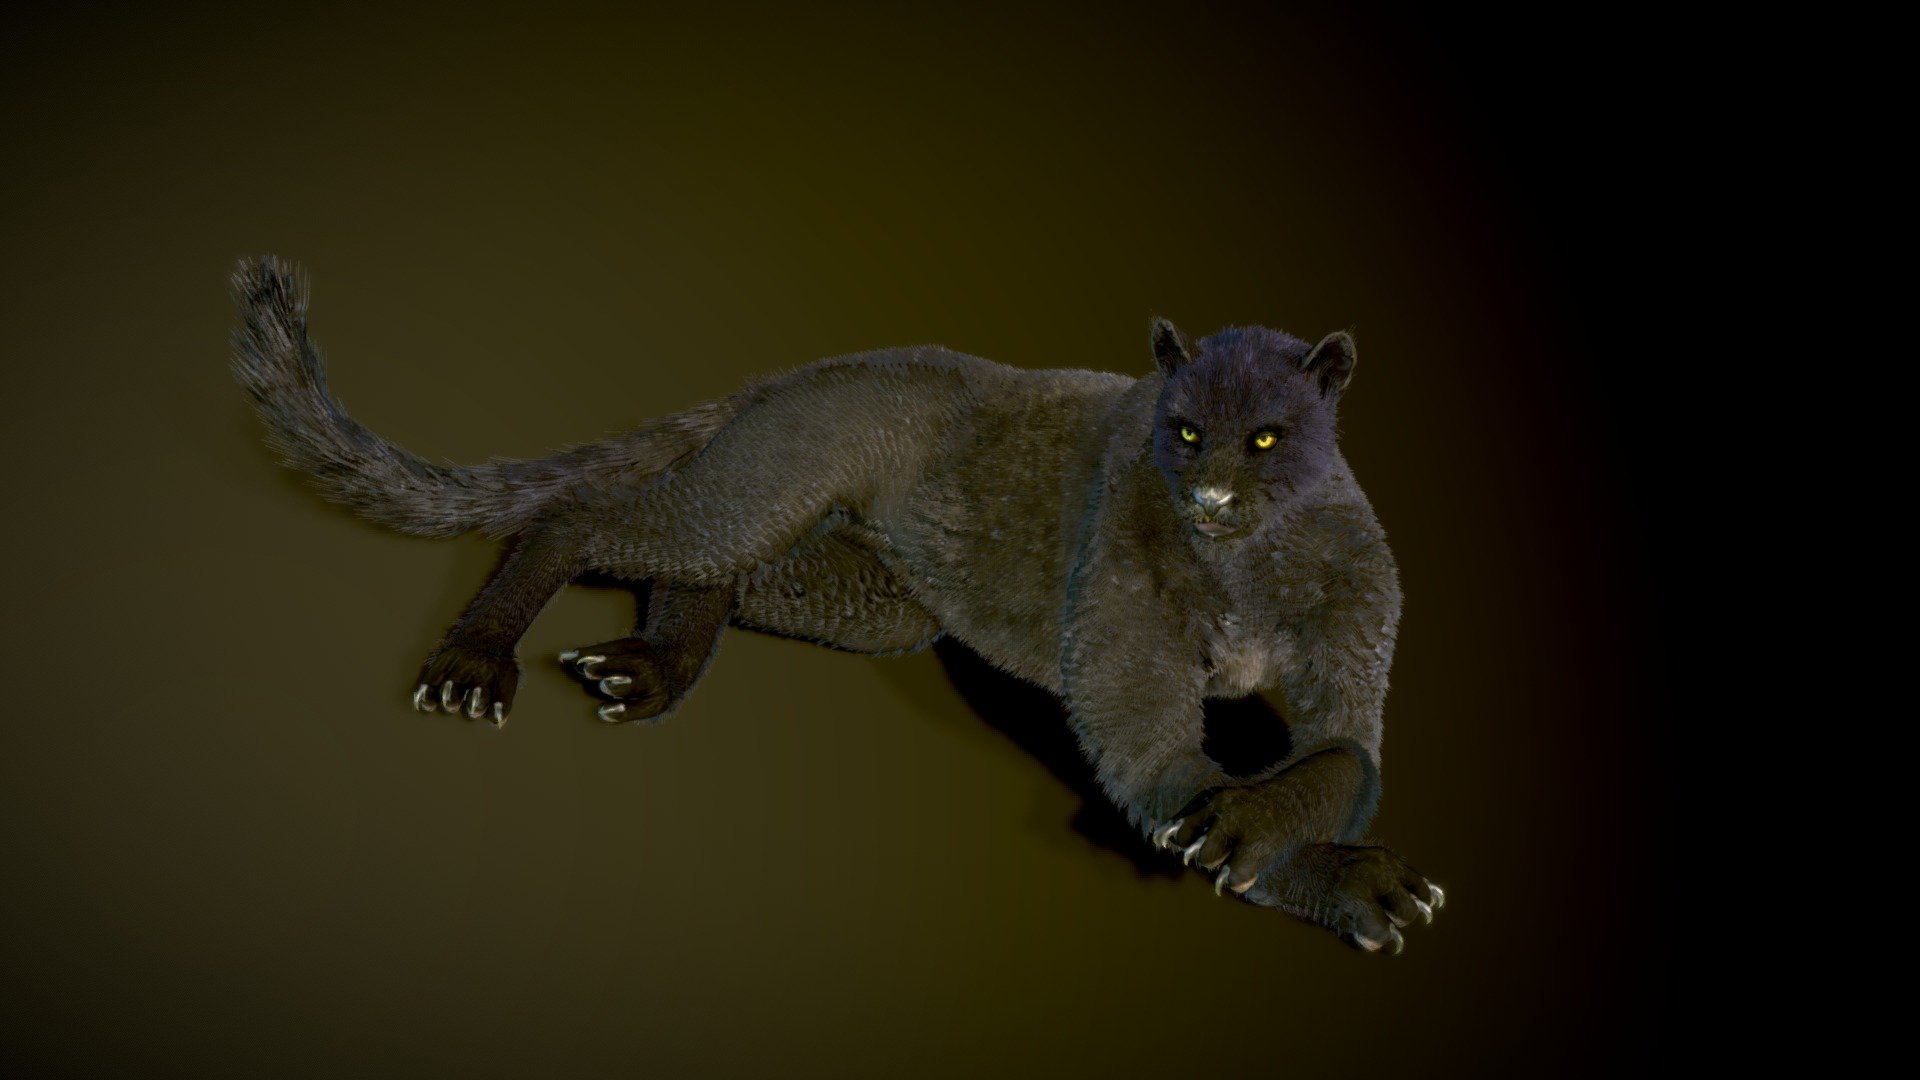 Click here to buy
Arabian Leopard - Panther - 3D model by NestaEric 3d model